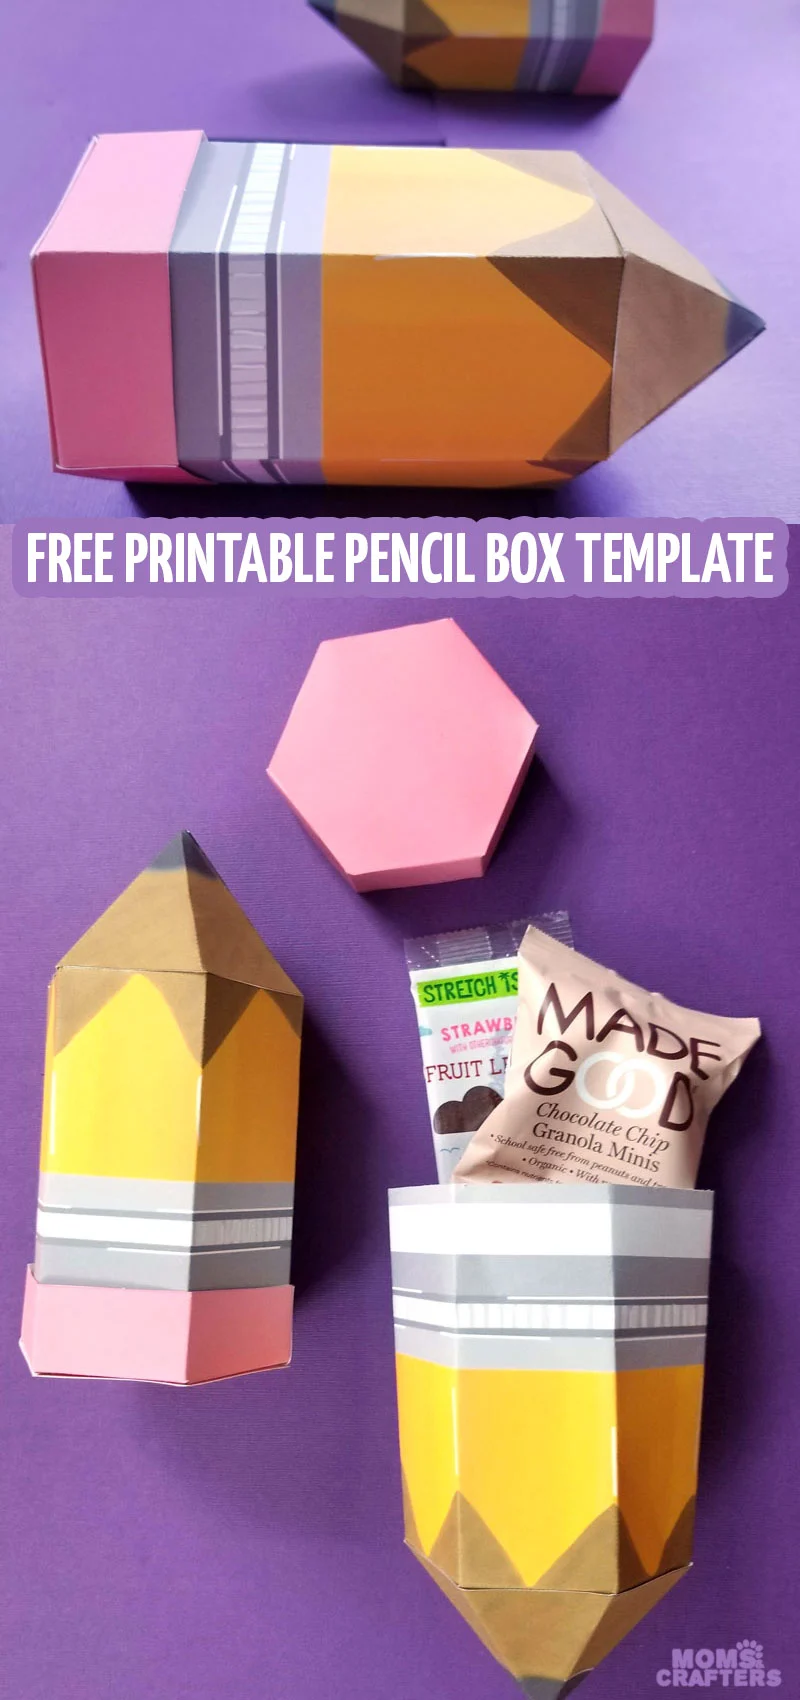 Grab your free printable pencil box template for a back to school treat for the first day of school or for a fun teachers gift idea! 